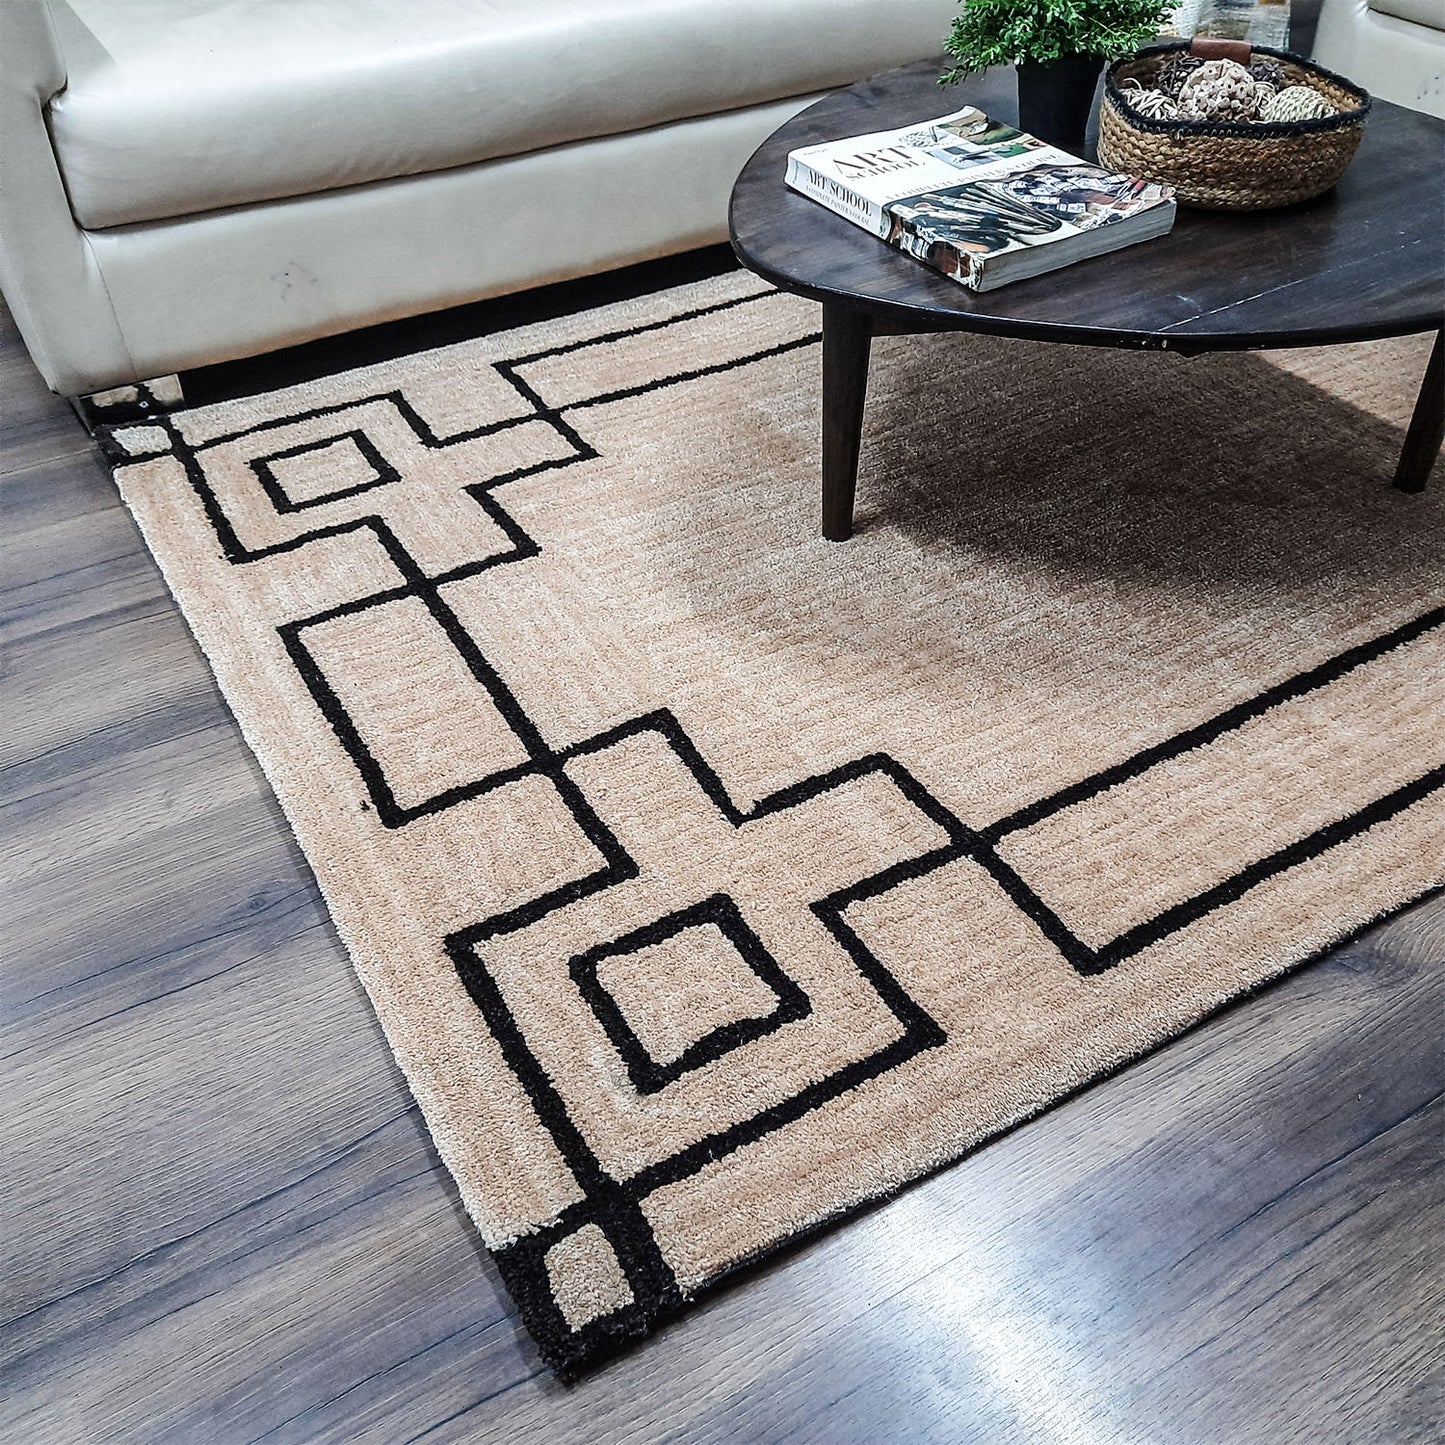 Avioni Luxury Collection- Plush Luxury Beige and CoffeeTone Carpet with 3d Traditional Design -Different Sizes Shaggy Fluffy Rugs and Carpet for Living Room